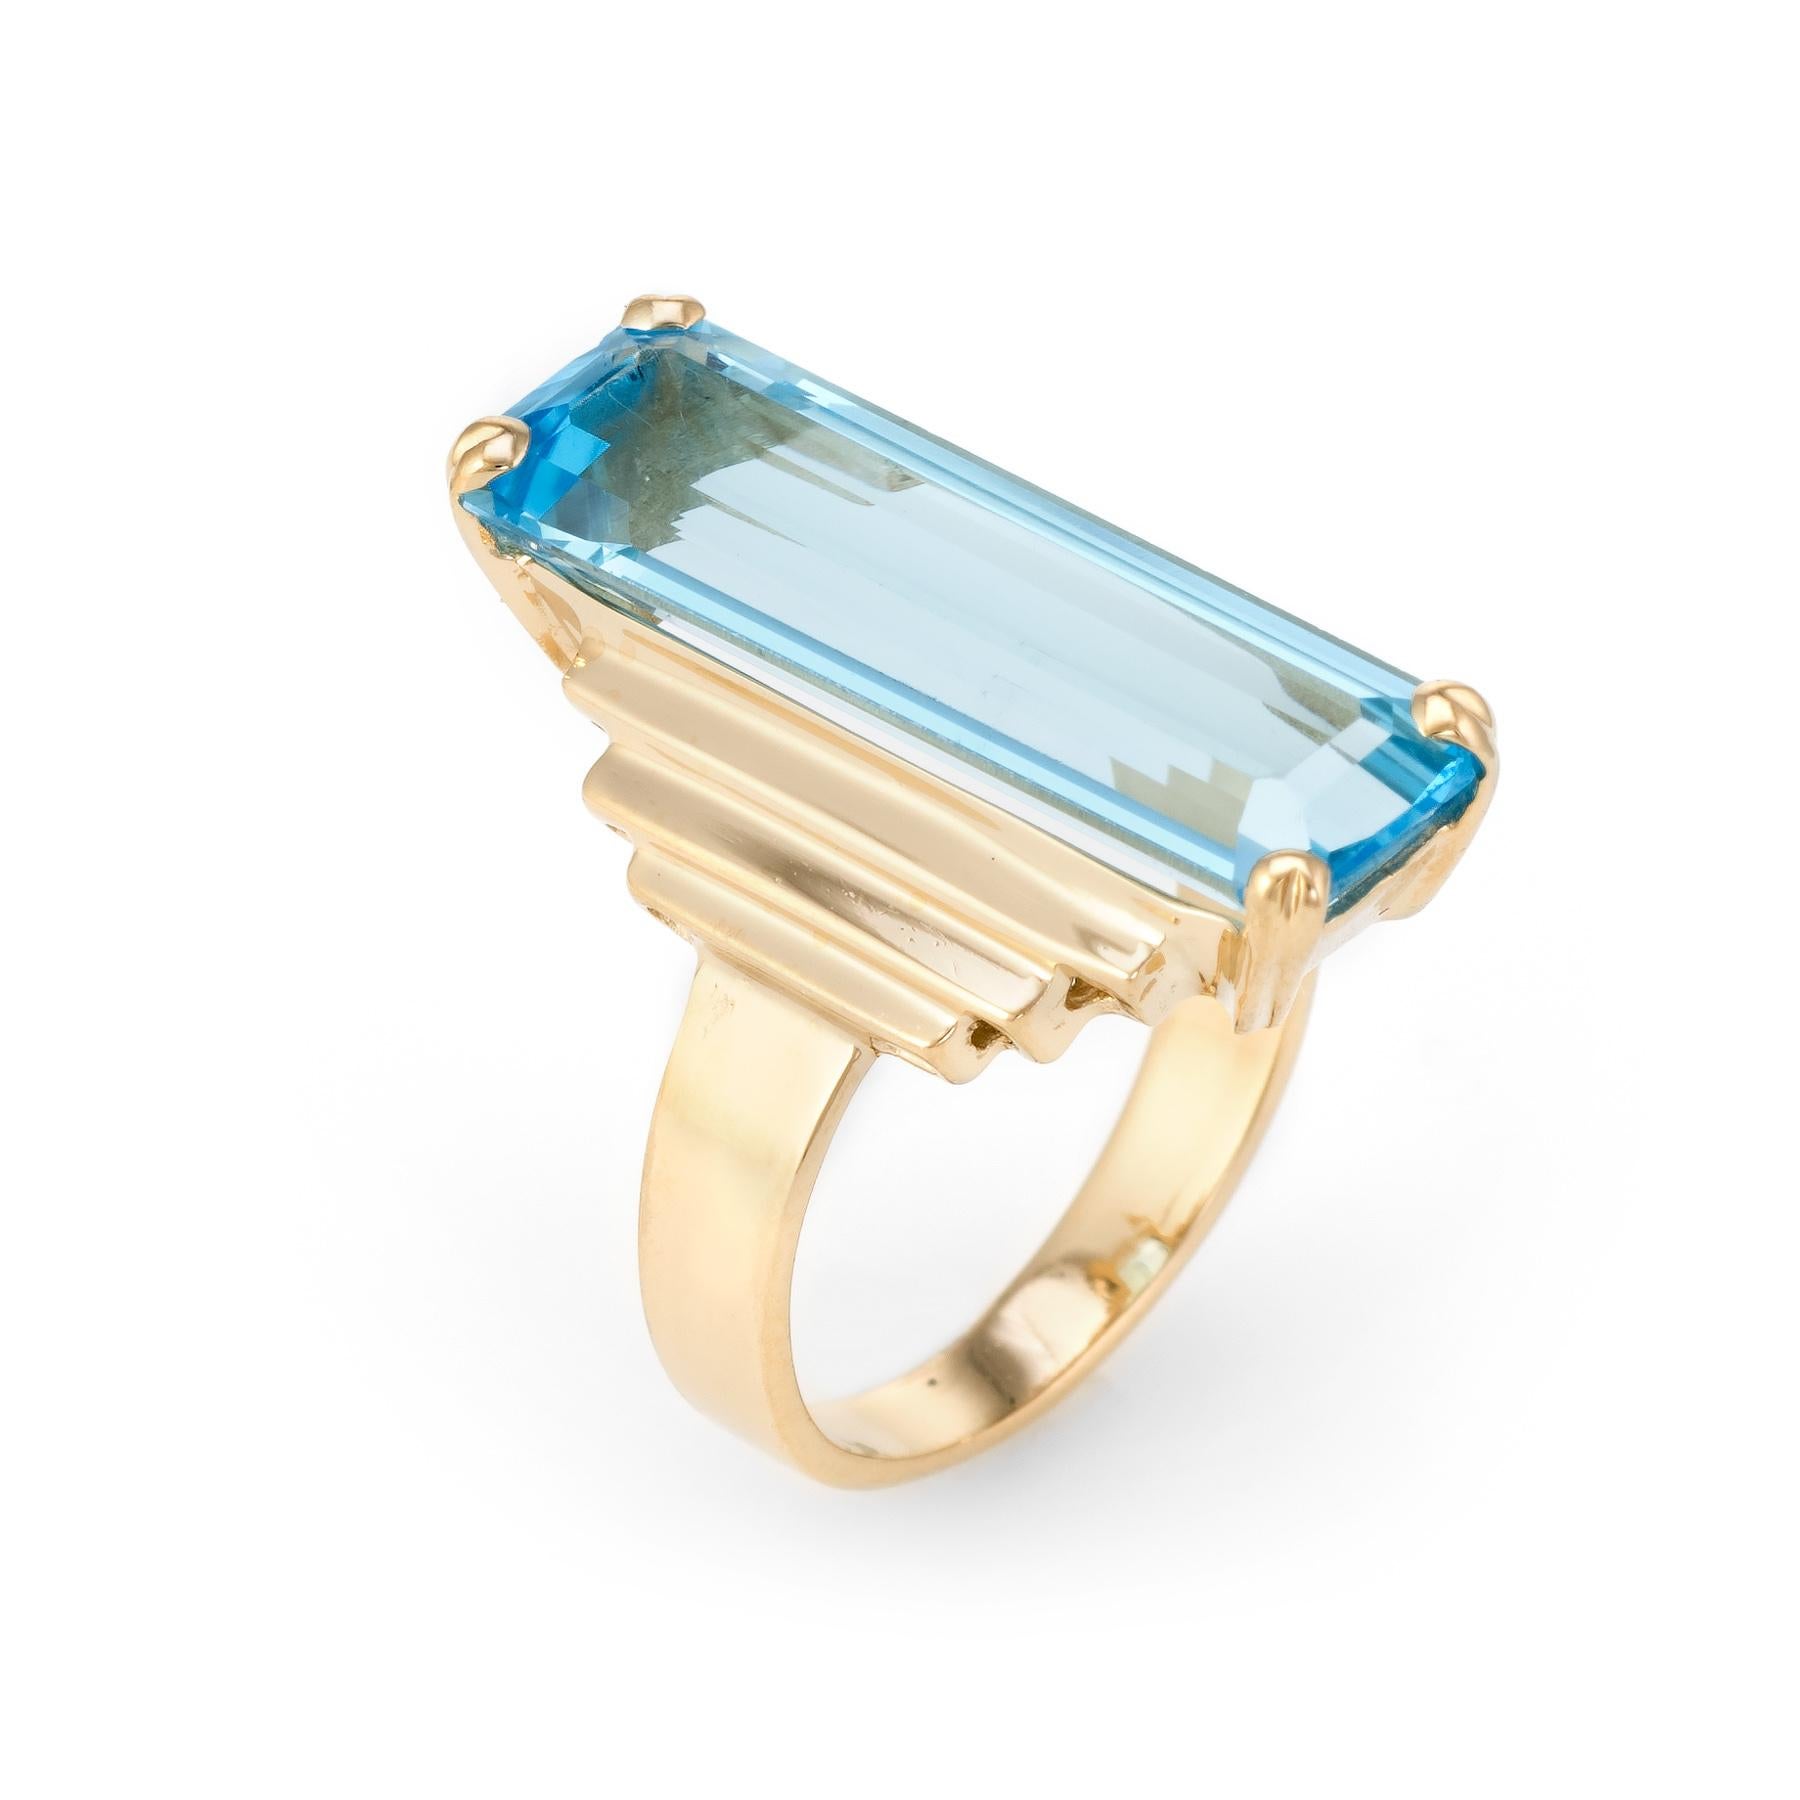 Finely detailed vintage cocktail ring (circa 1960s to 1970s), crafted in 14 karat yellow gold. 

Large emerald cut blue topaz measures 25mm x 8mm (estimated at 15 carats). The topaz is in excellent condition and free of cracks or chips. 

Bold and